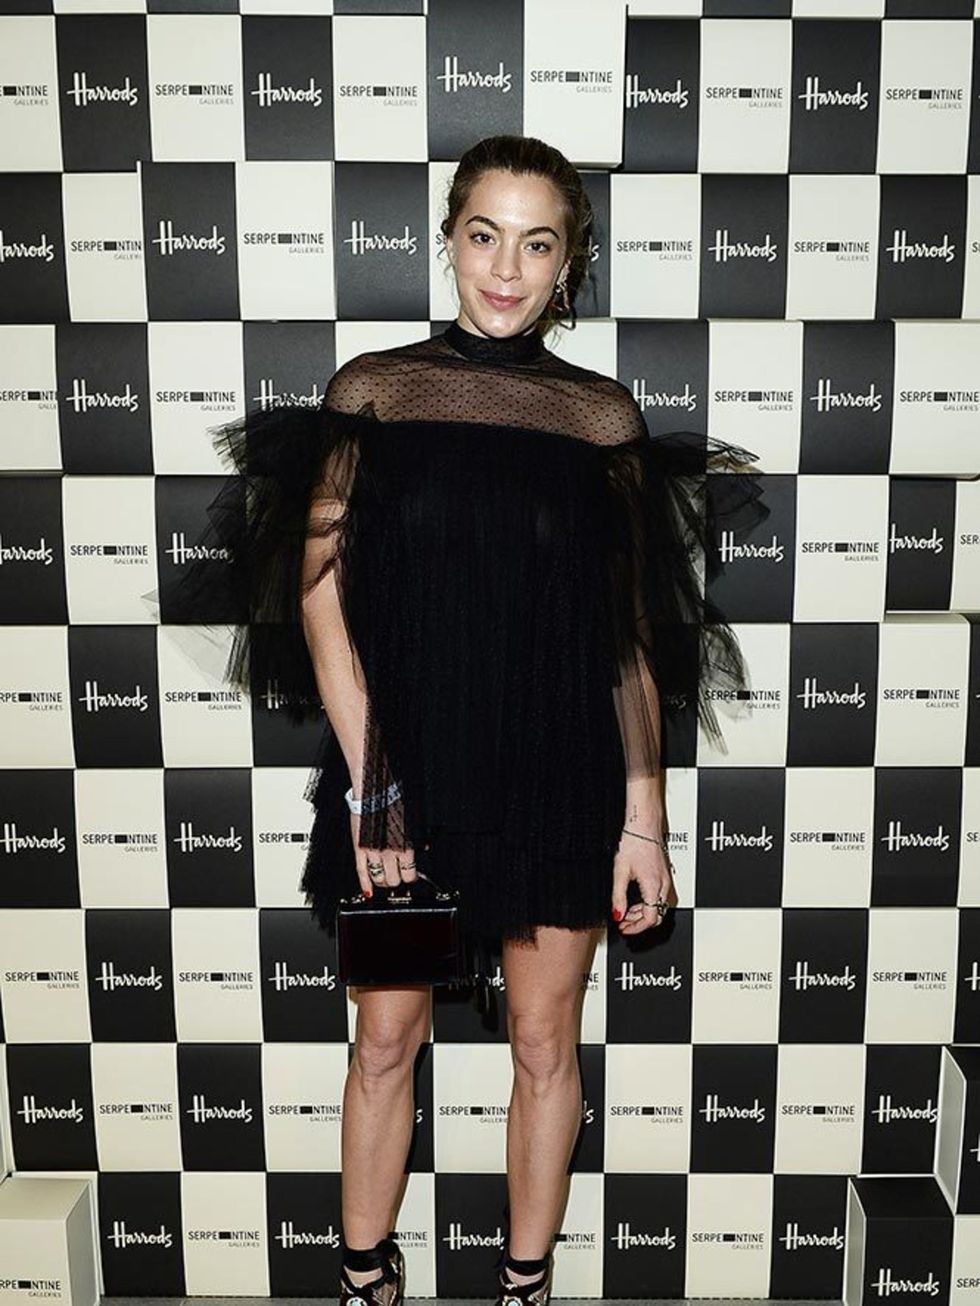 Chelsea Leyland attends the Serpentine Gallery and Harrods Future Contemporaries during London Fashion Week AW16